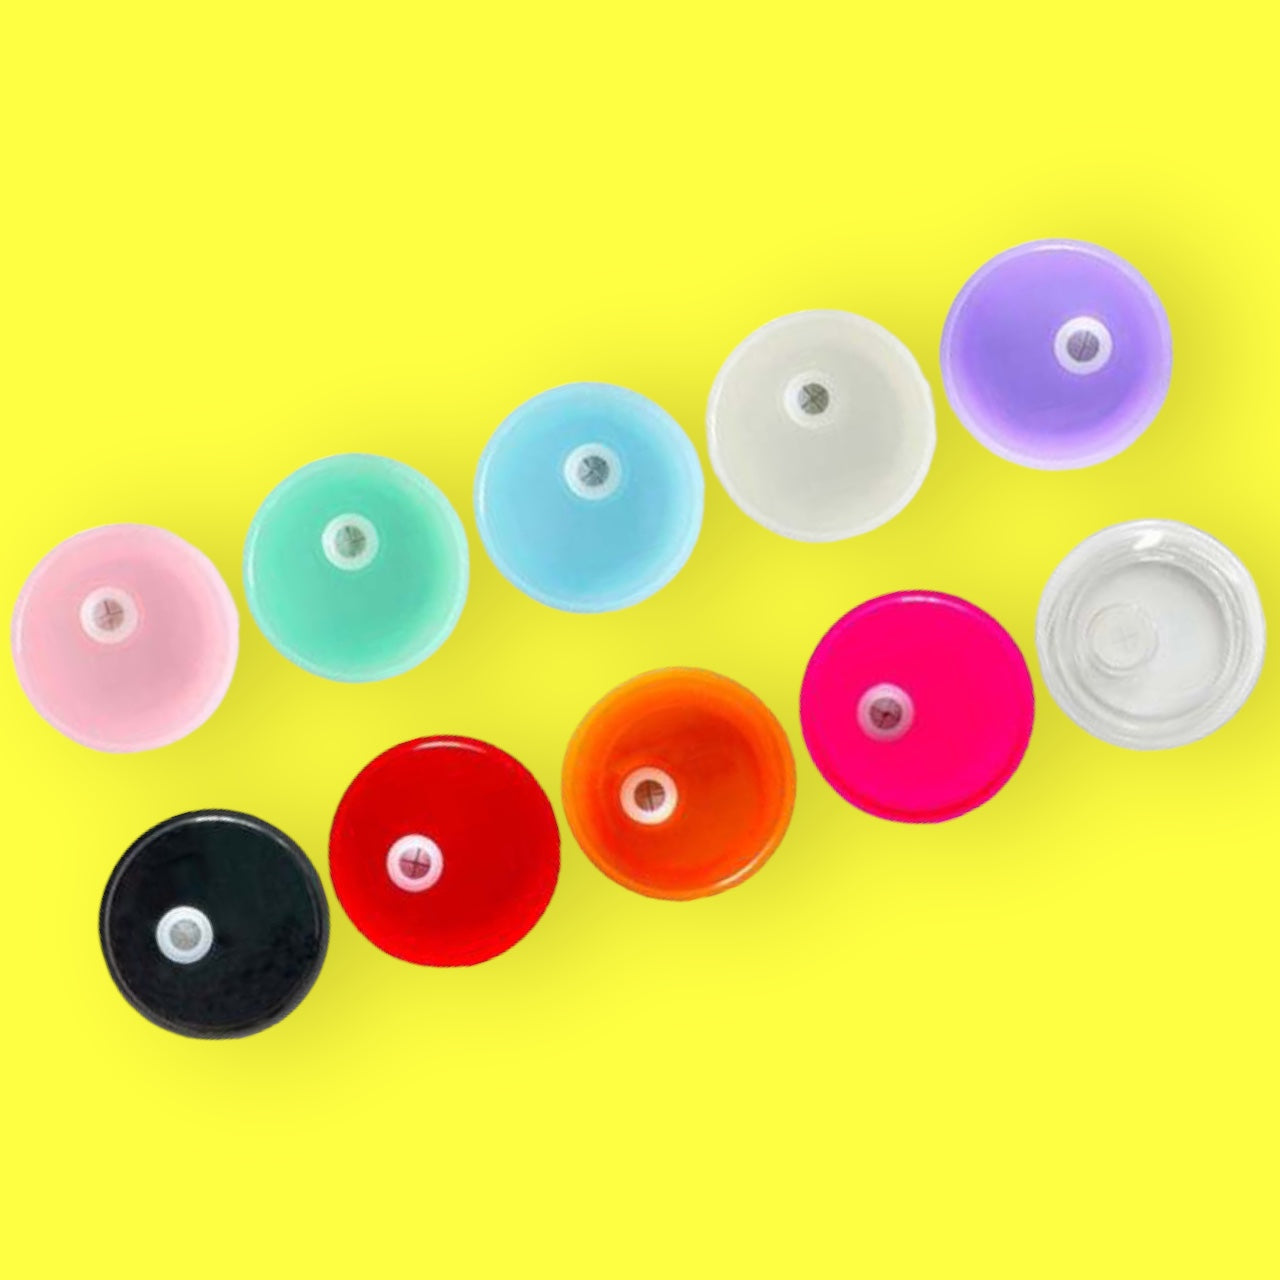 NEW BPA Free Colorful Replacement Plastic Sealing Pp Acrylic Lid For 16oz  Glass Can Material Spill Proof Splash Resistant Cover For Straight Cup From  Wingarden, $0.63